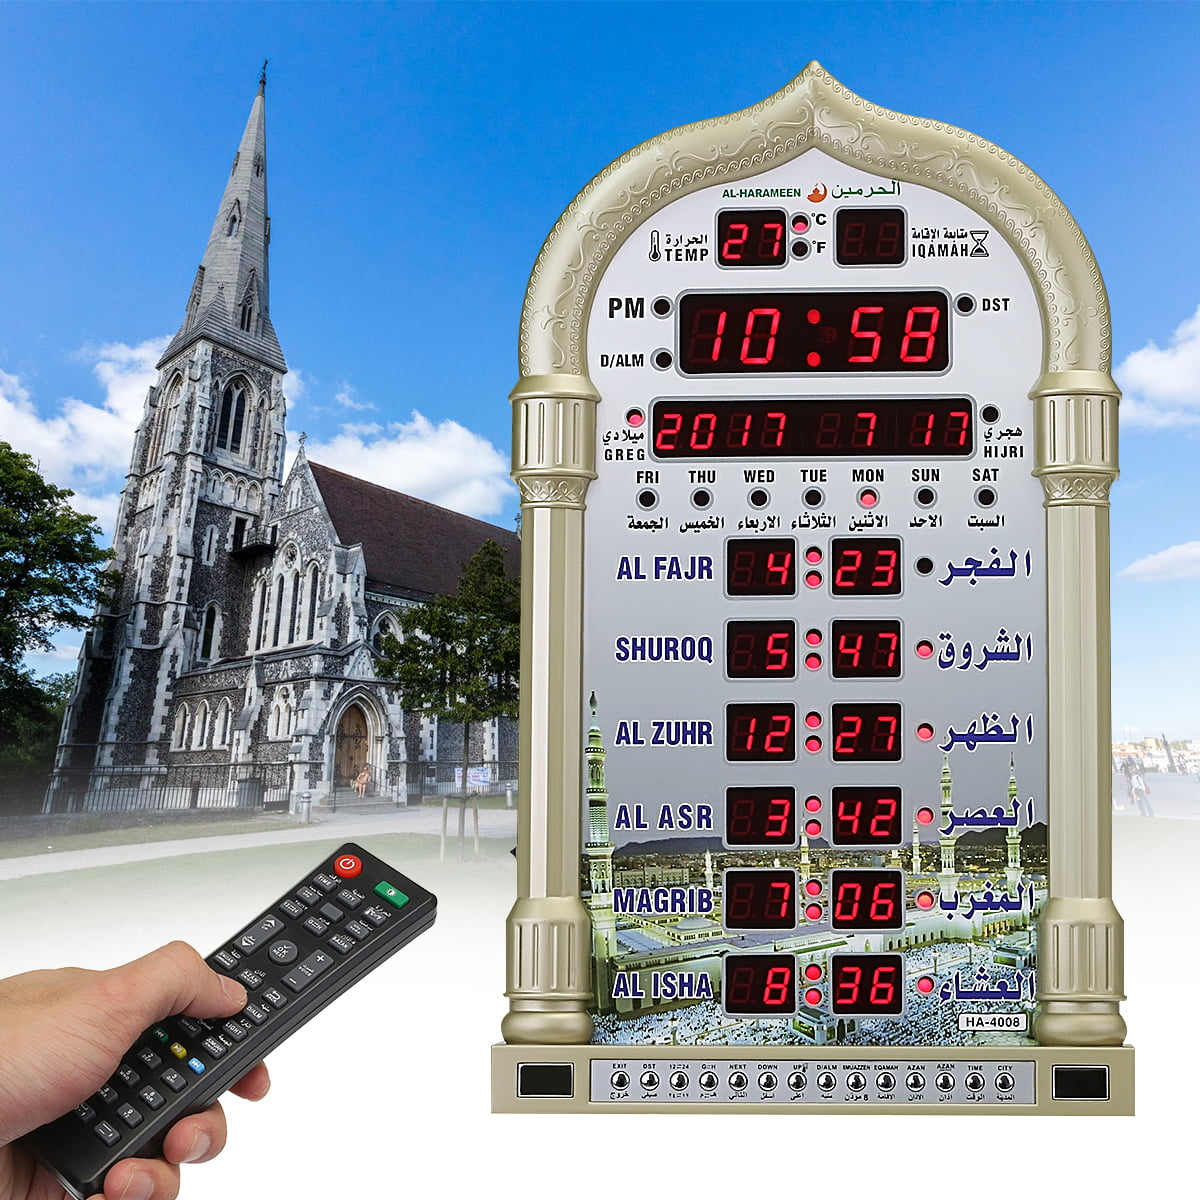 Masjidal 10 inch Azan Clock Muslim Athan Clock Athan Frame Sync with Mosque Full Color HD Display,Home/Office/Mosque Digital Decorative